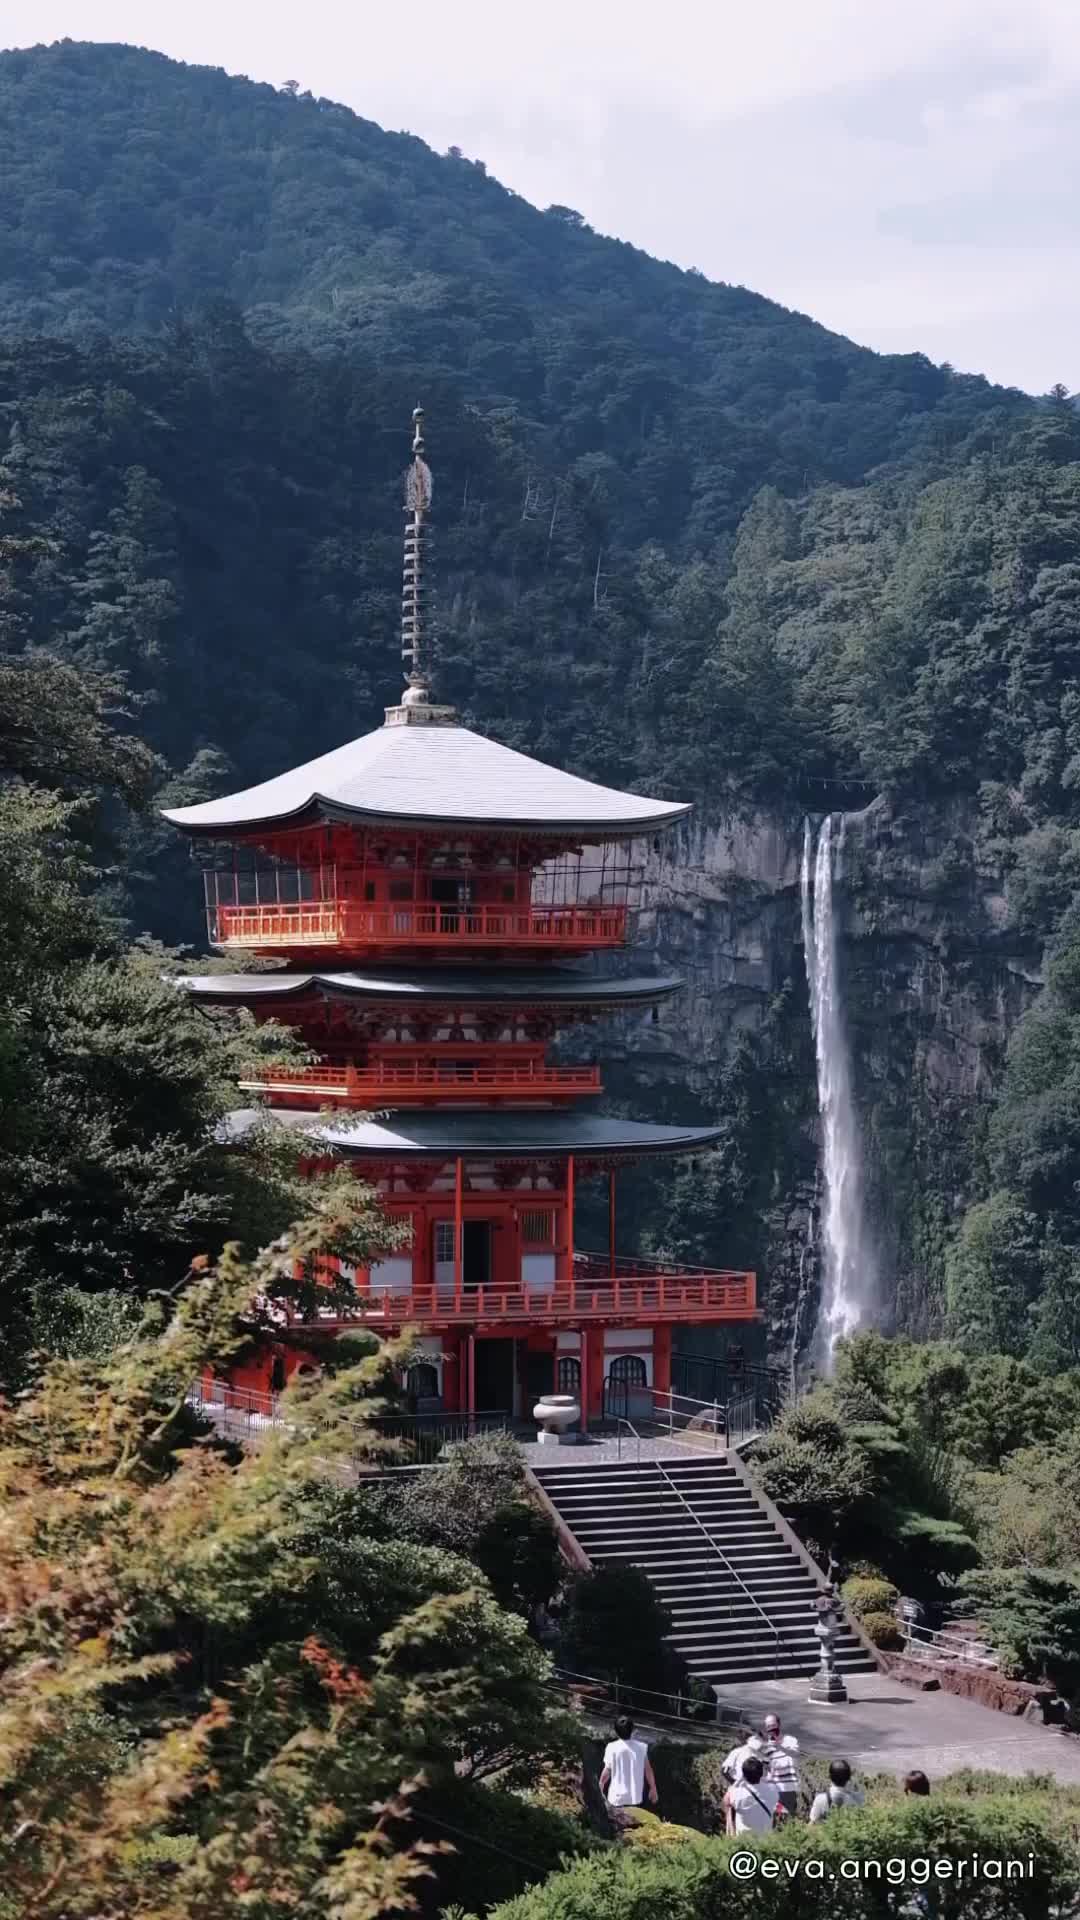 Wonderful view of Nachi falls & Seiganto-ji, Wakayama 🇯🇵📍
There are lot of wonderful places in Japan, this is absolutely one of my favorites 🤍
It’s actually quite far from the city, but still worth it!